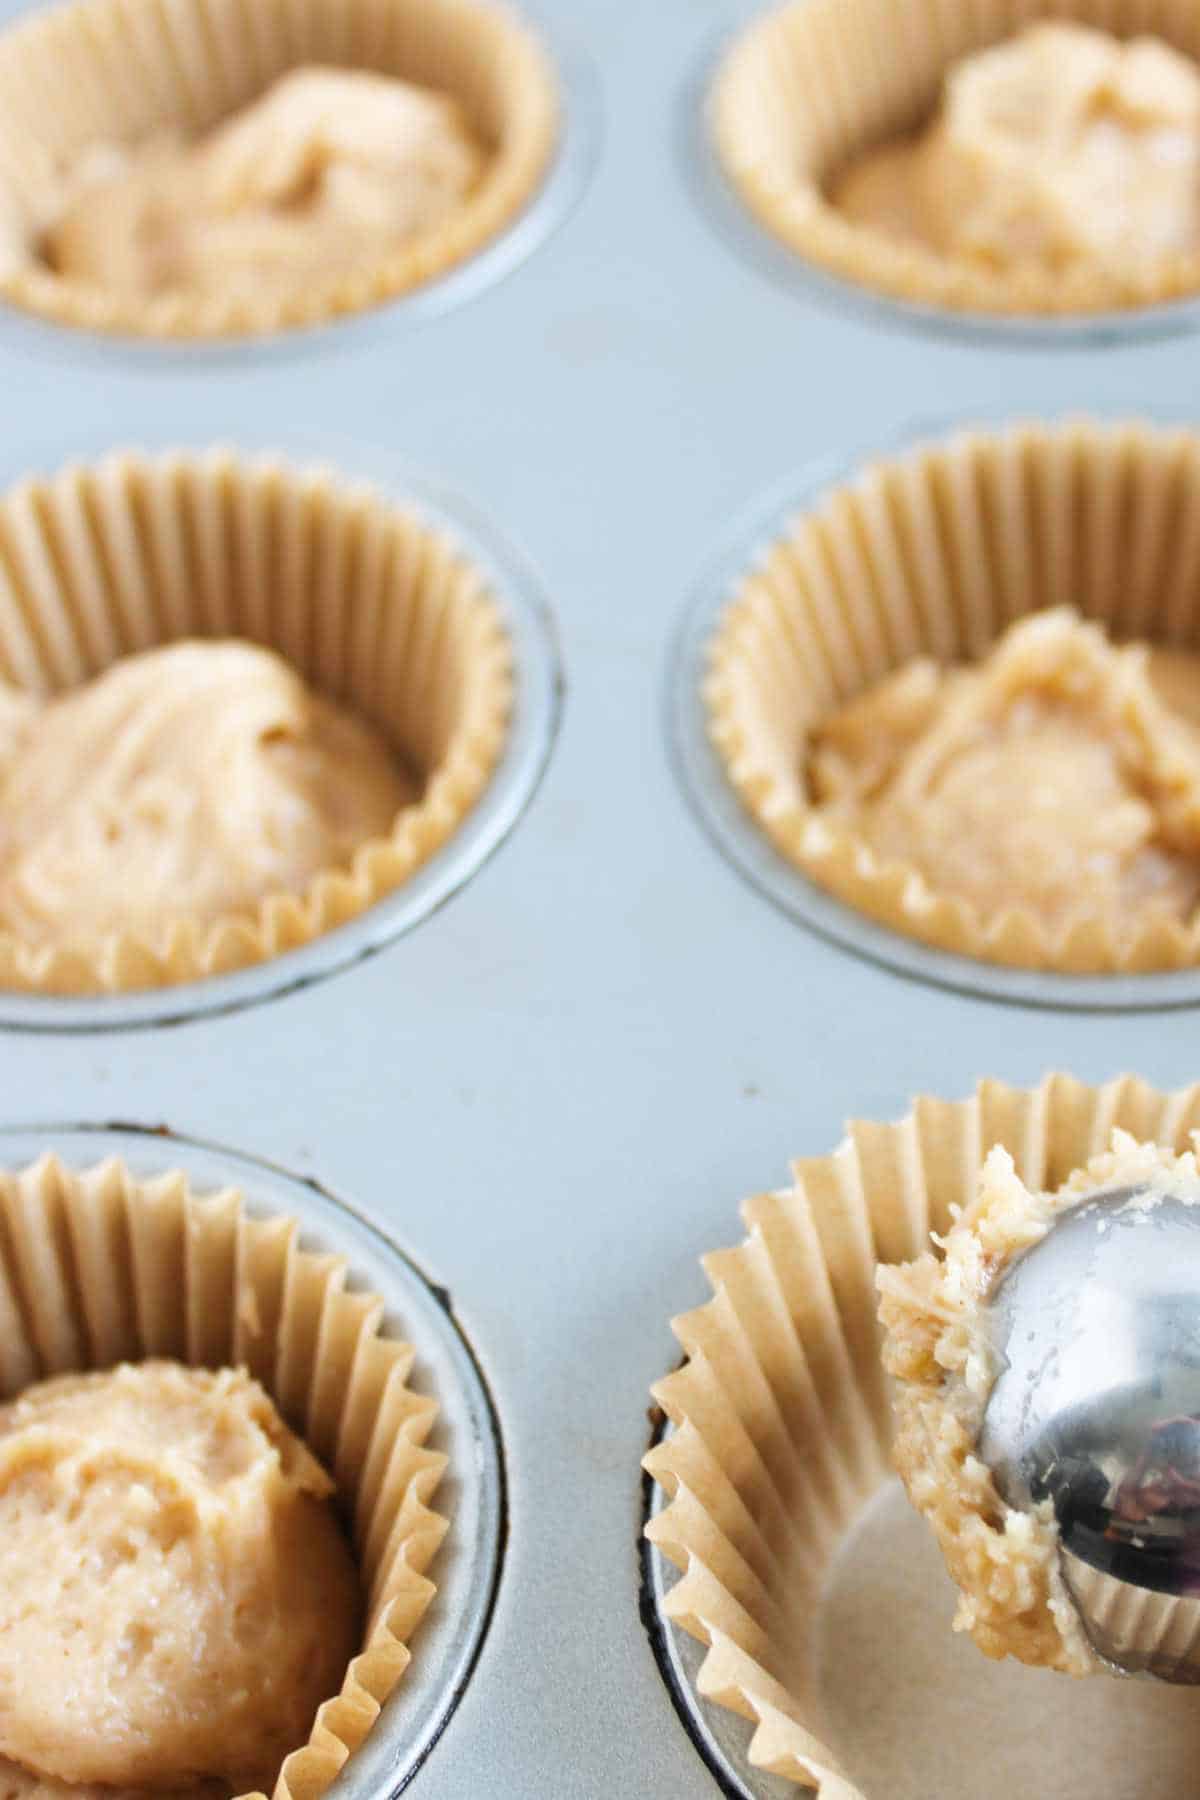 scoops of batter in lined muffin tin cavities.